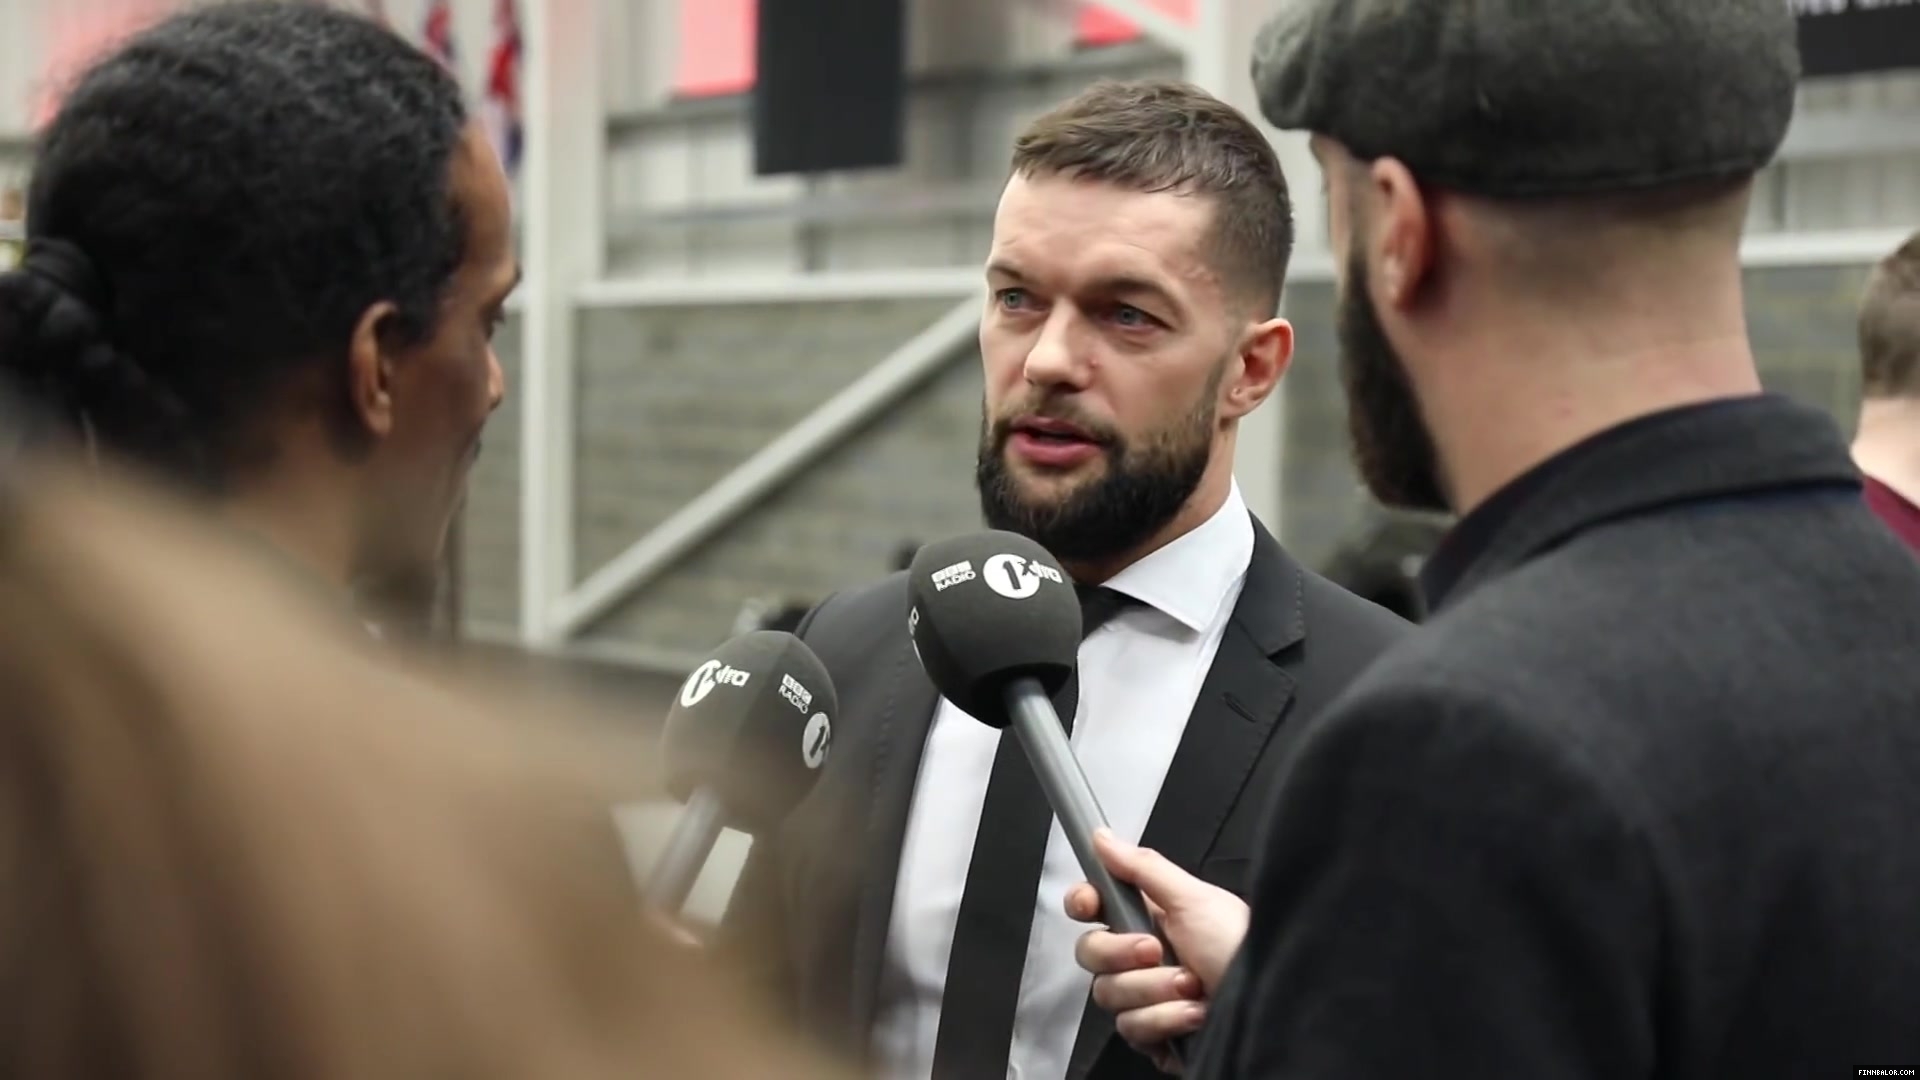 WWE_Superstar_FINN_BALOR_joins_MOUSTACHE_MOUNTAIN_at_the_opening_of_the_NXT_UK_PC_024.jpg